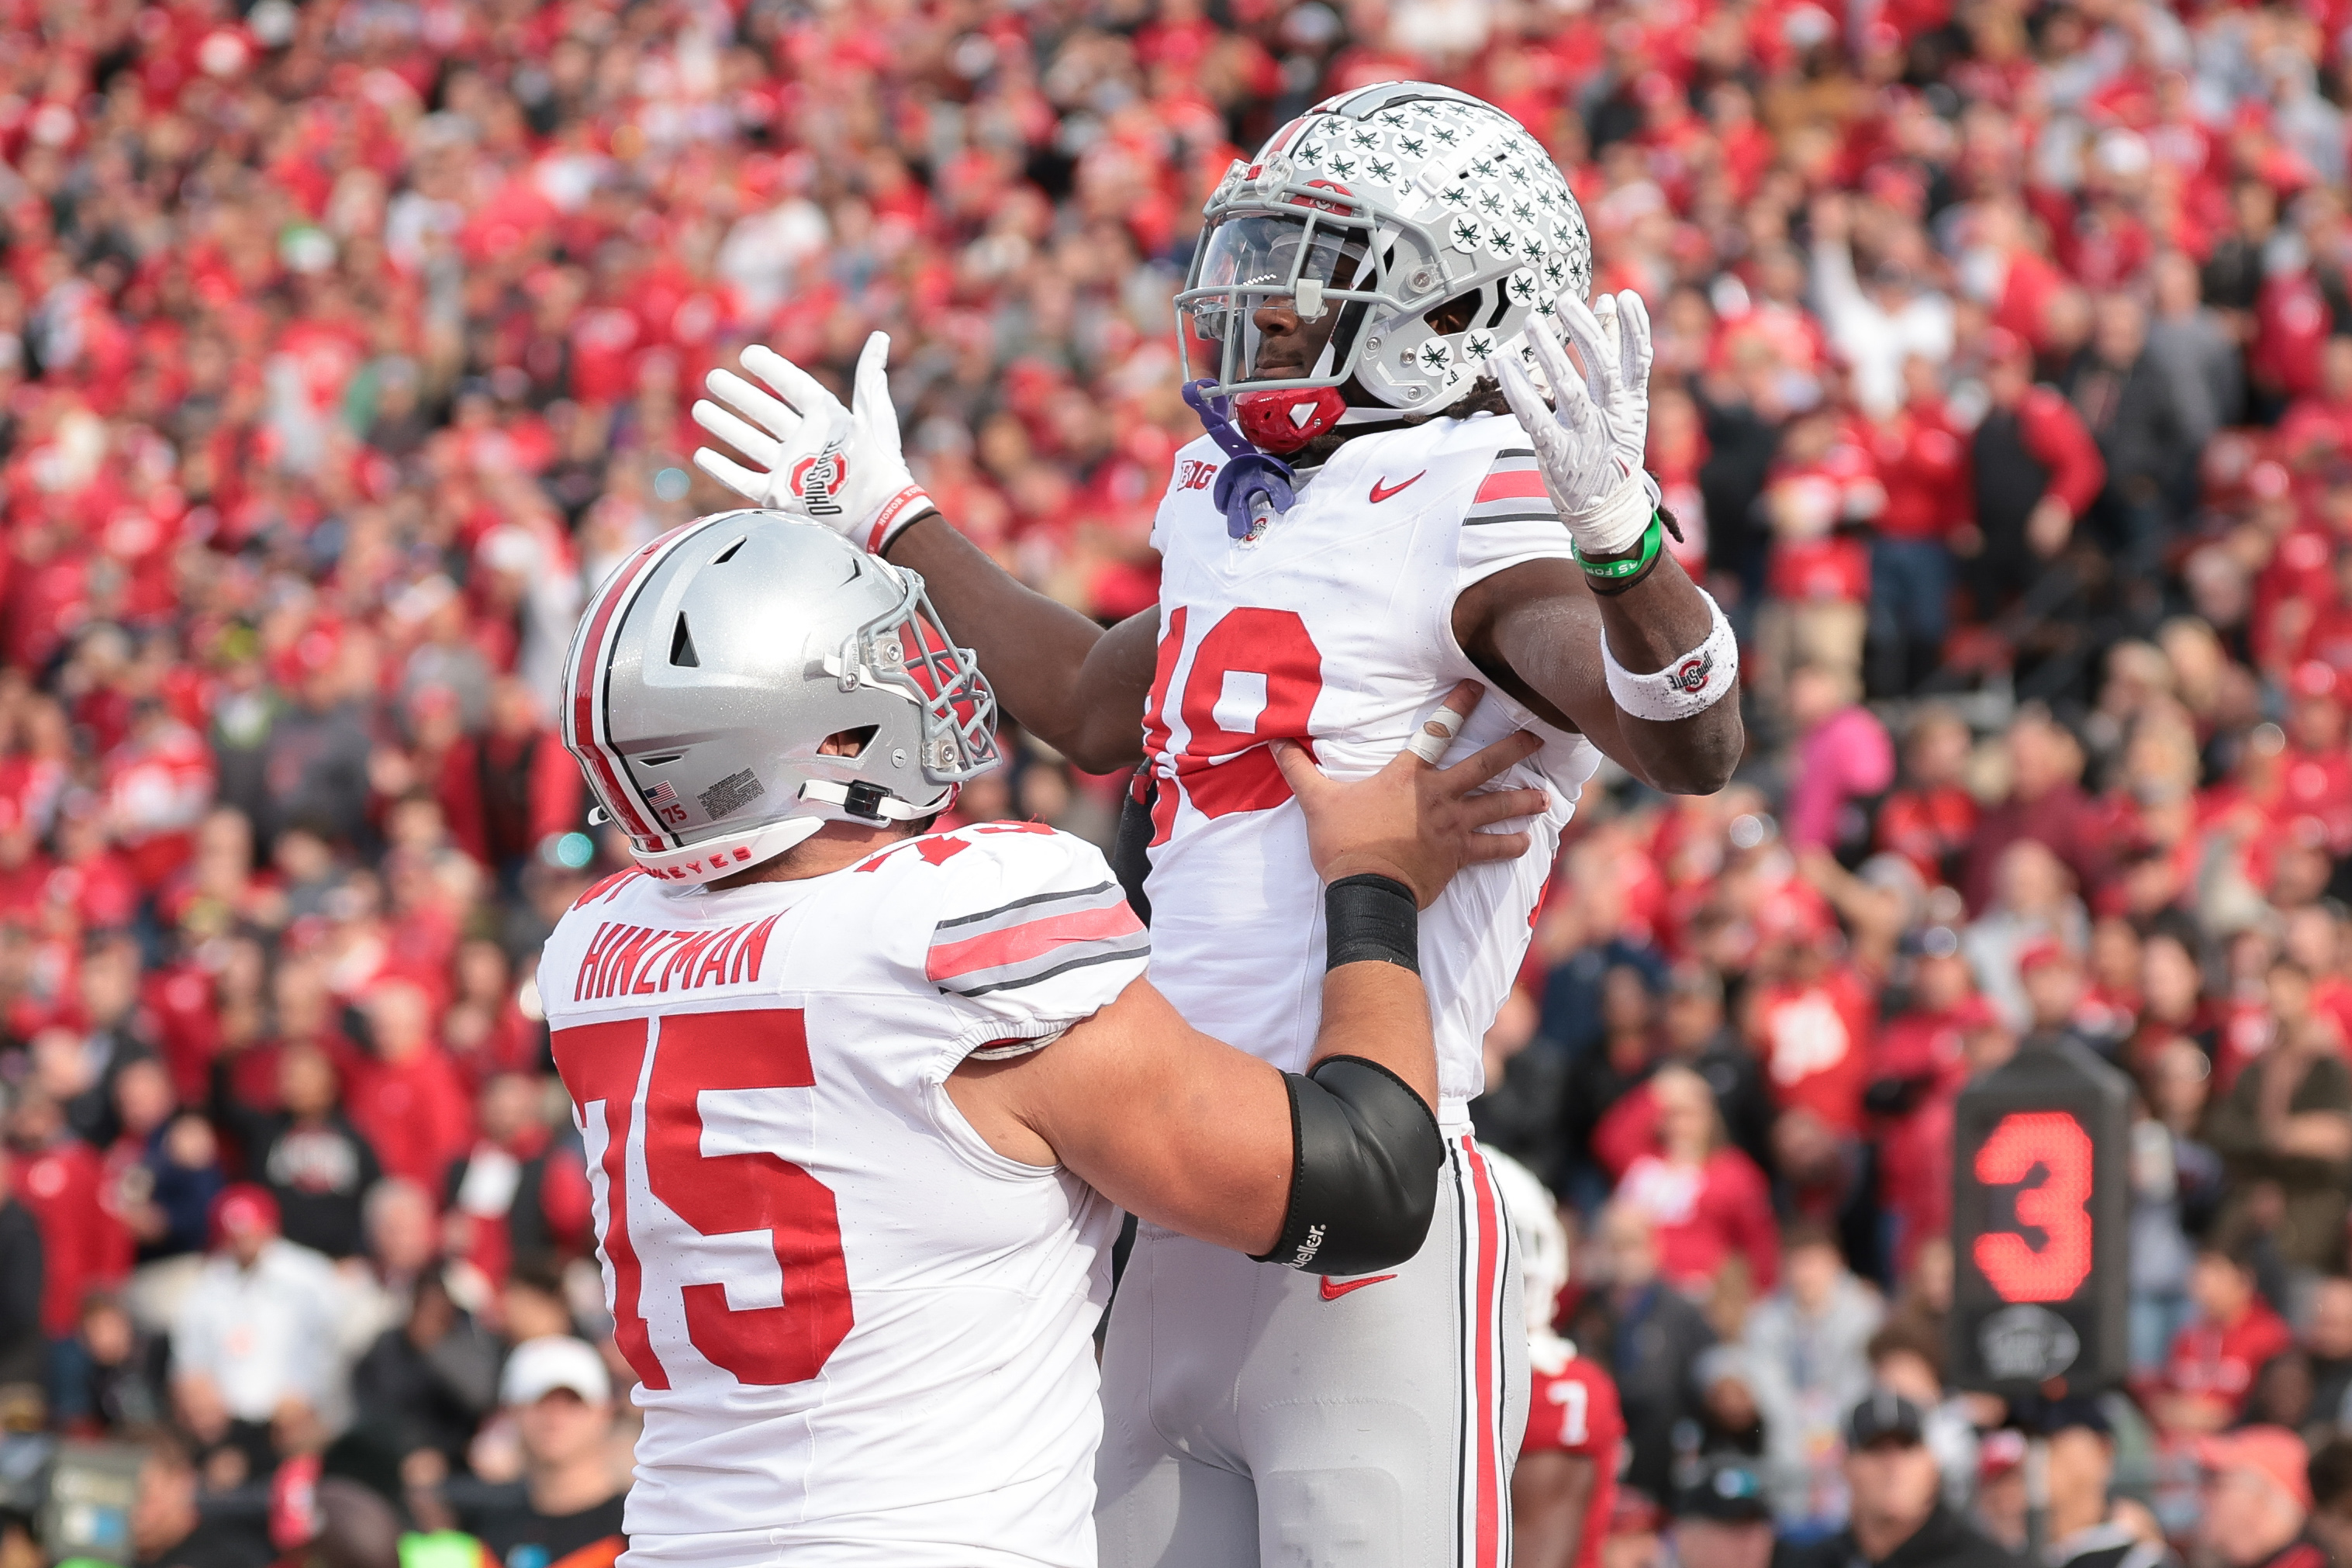 Nov 4, 2023; Piscataway, New Jersey, USA; Ohio State Buckeyes wide receiver Marvin Harrison Jr. (18) celebrates with offensive lineman Carson Hinzman (75) after scoring a touchdown against the Rutgers Scarlet Knights during the second half at SHI Stadium. Mandatory Credit: Vincent Carchietta-USA TODAY Sports